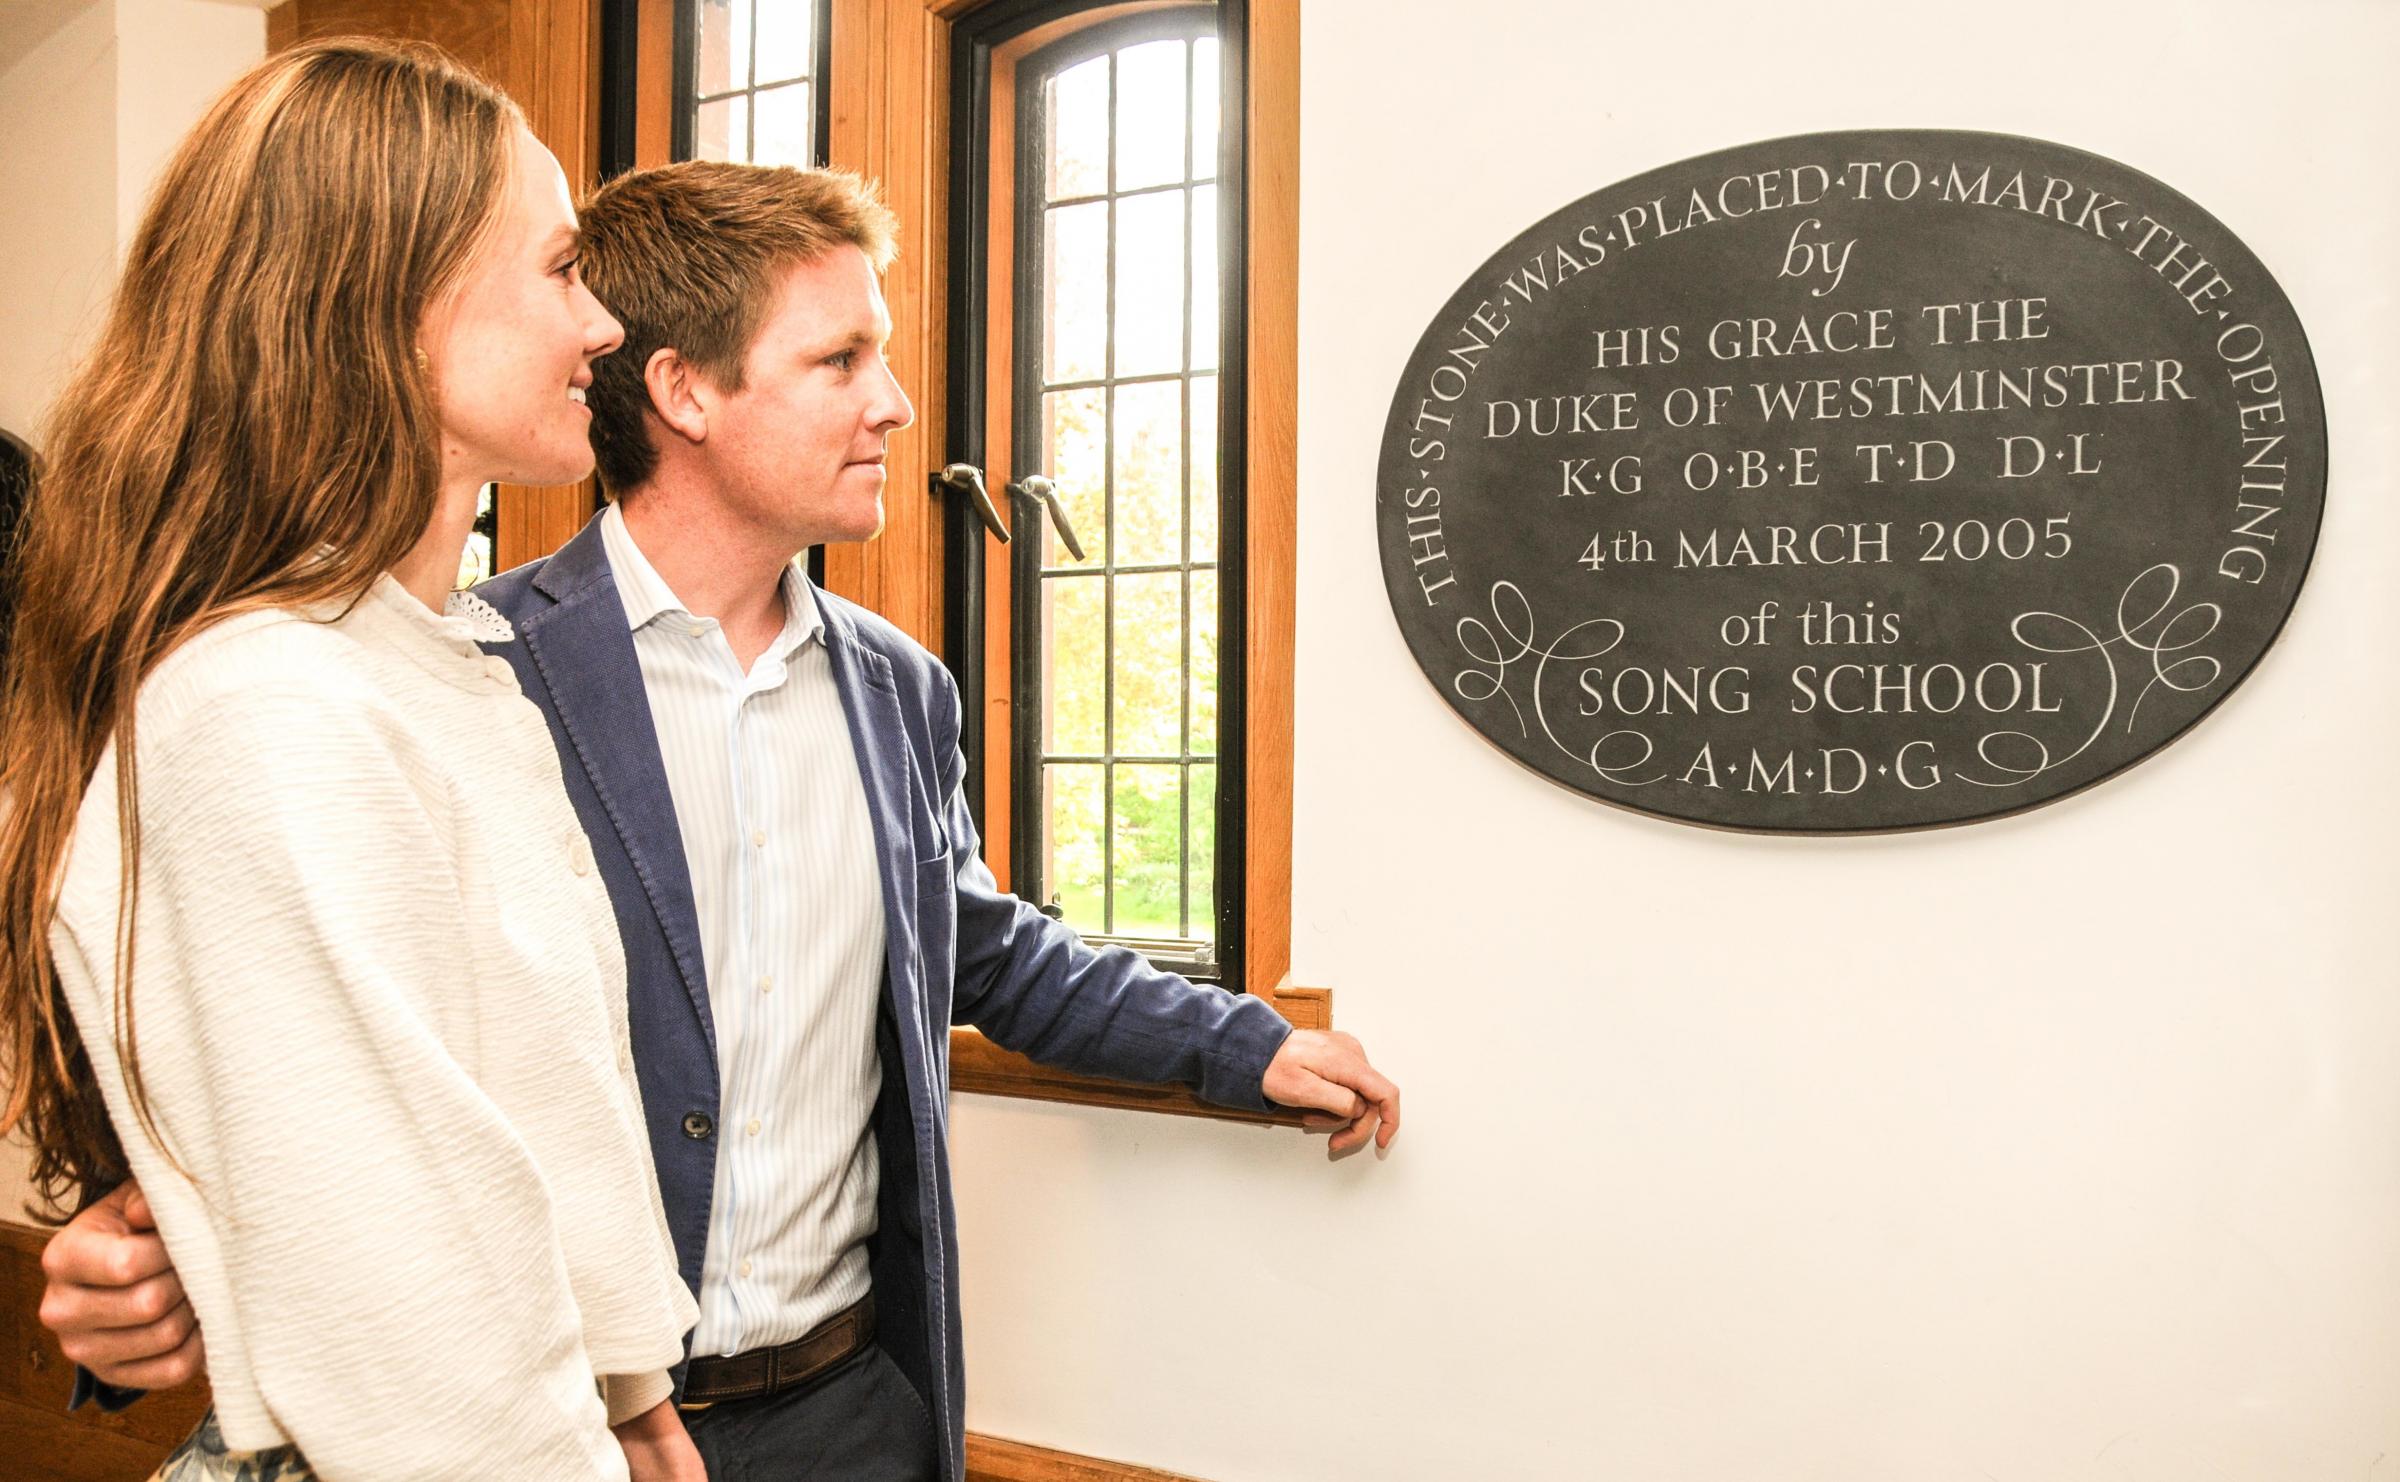 Hugh Grosvenor, with Olivia Henson, view the plaque honouring the dukes father when he opened the cathedrals Song School in 2005.